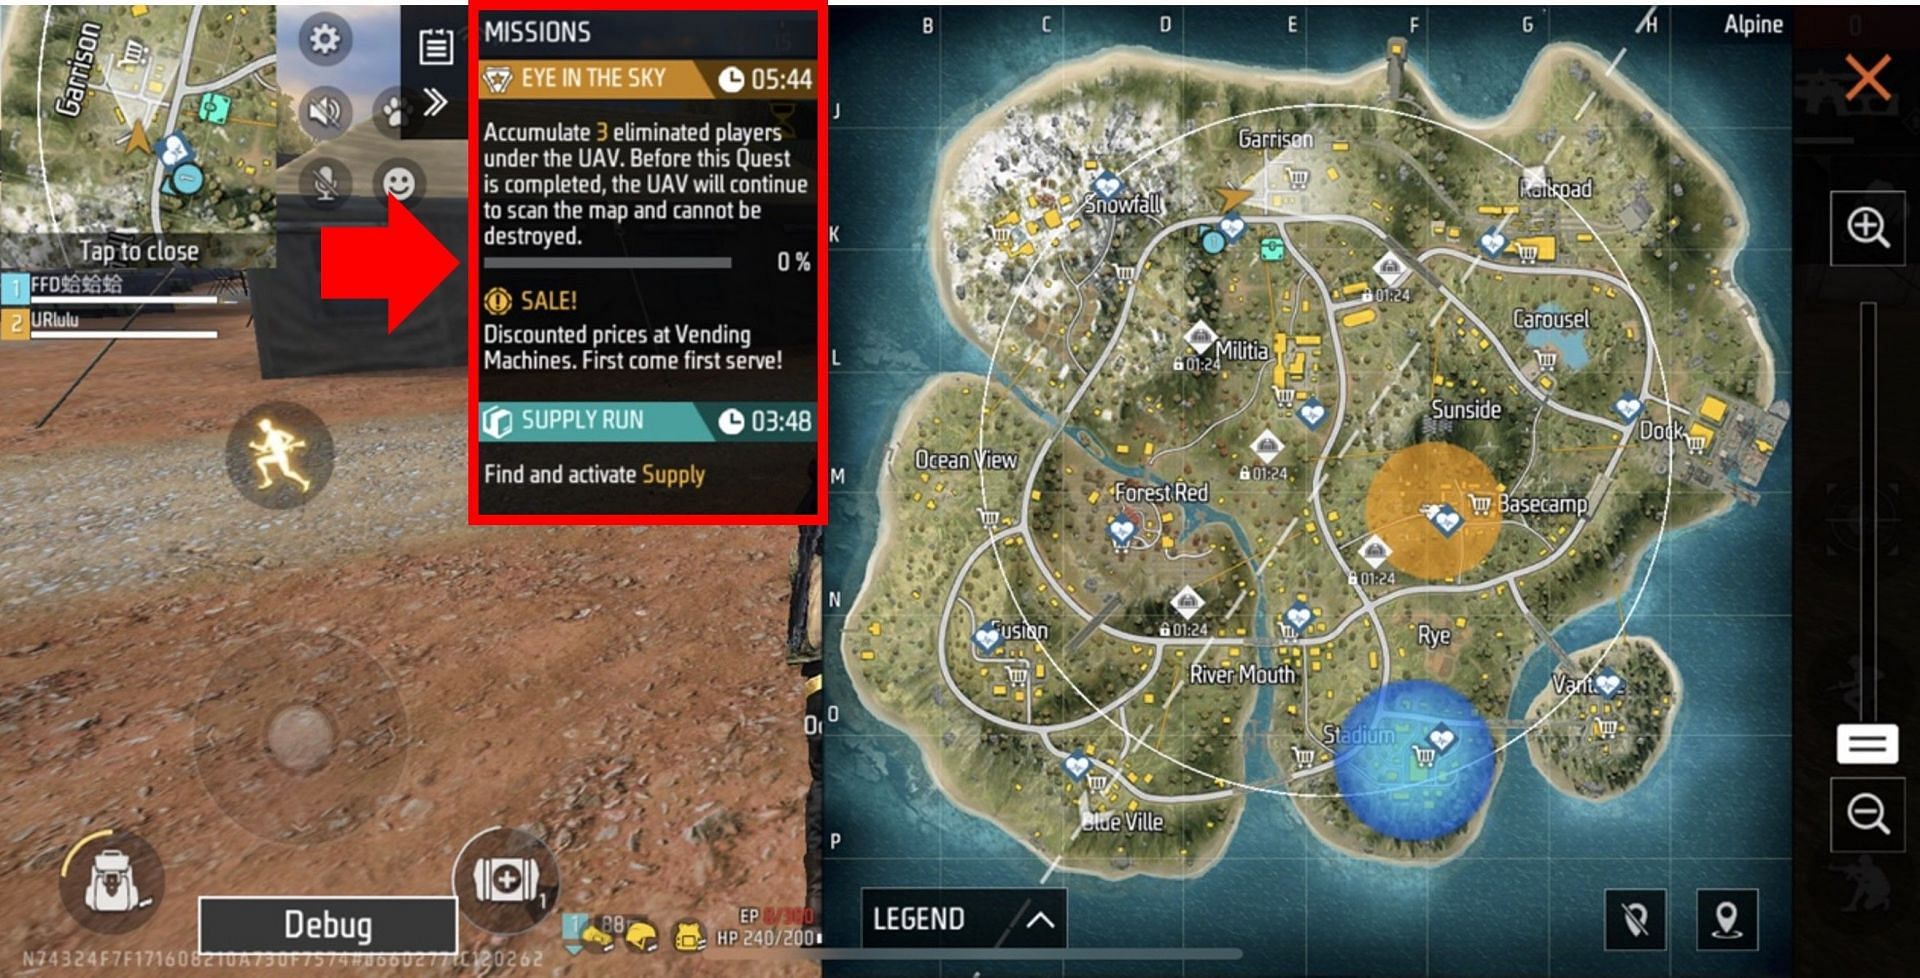 Free Fire Advance Server Live - New Map, New Character, New System